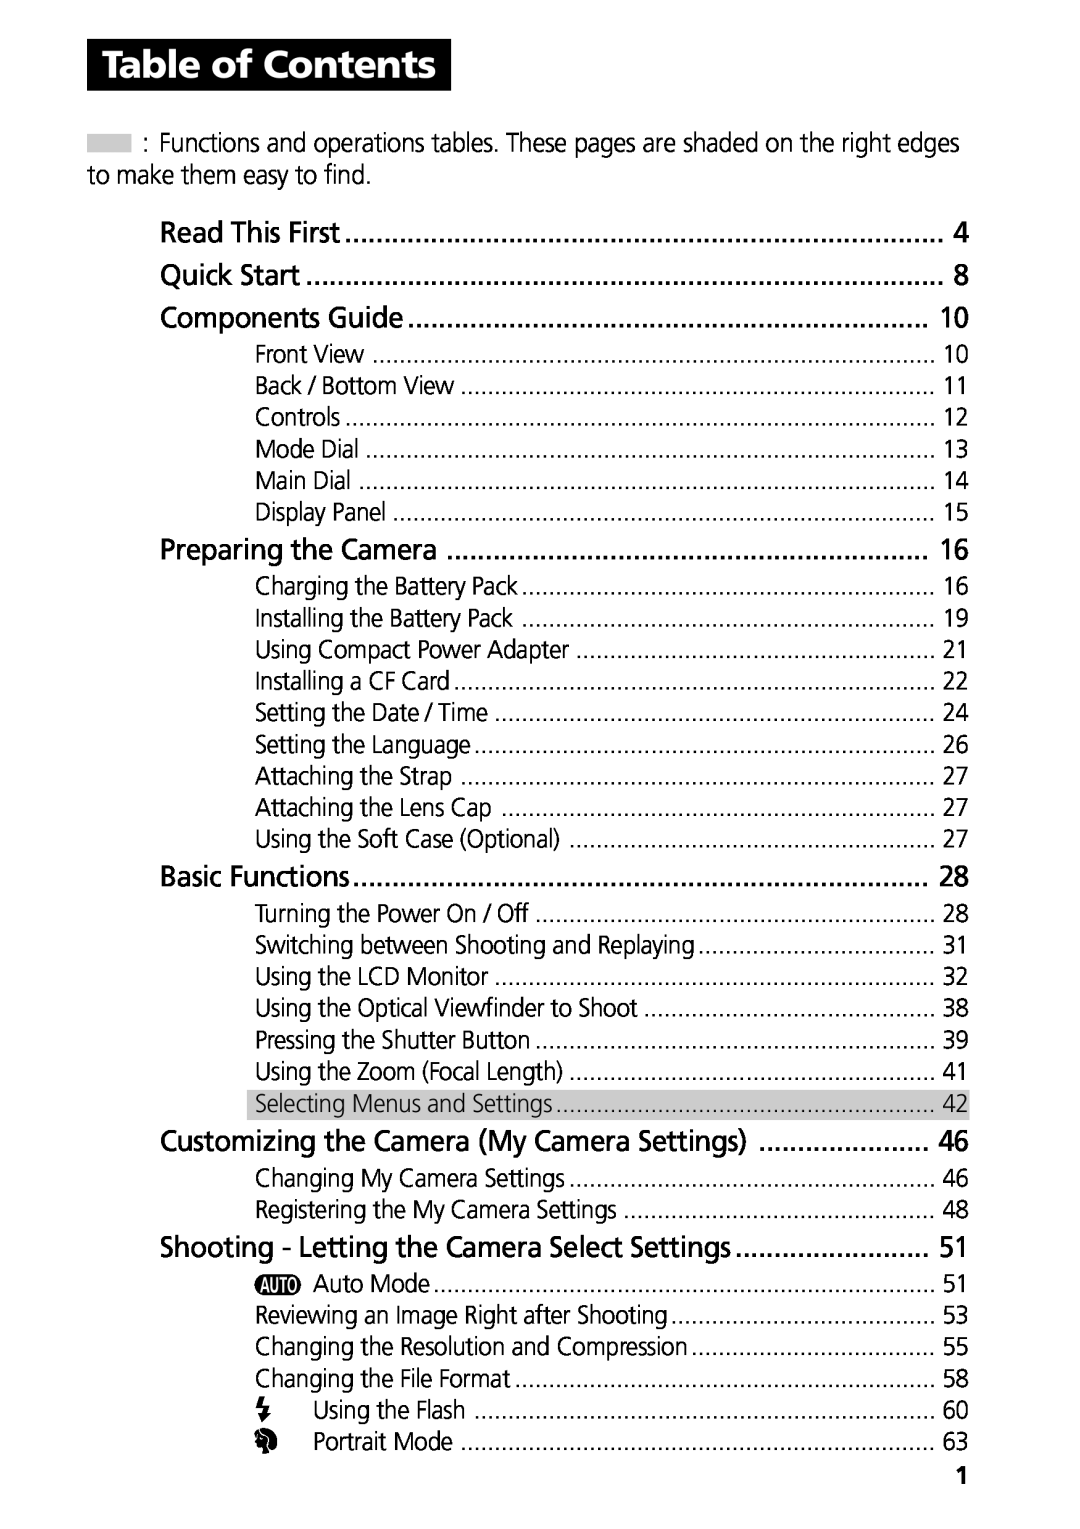 Canon G3 manual Table of Contents, Components Guide, Preparing the Camera, Customizing the Camera My Camera Settings 